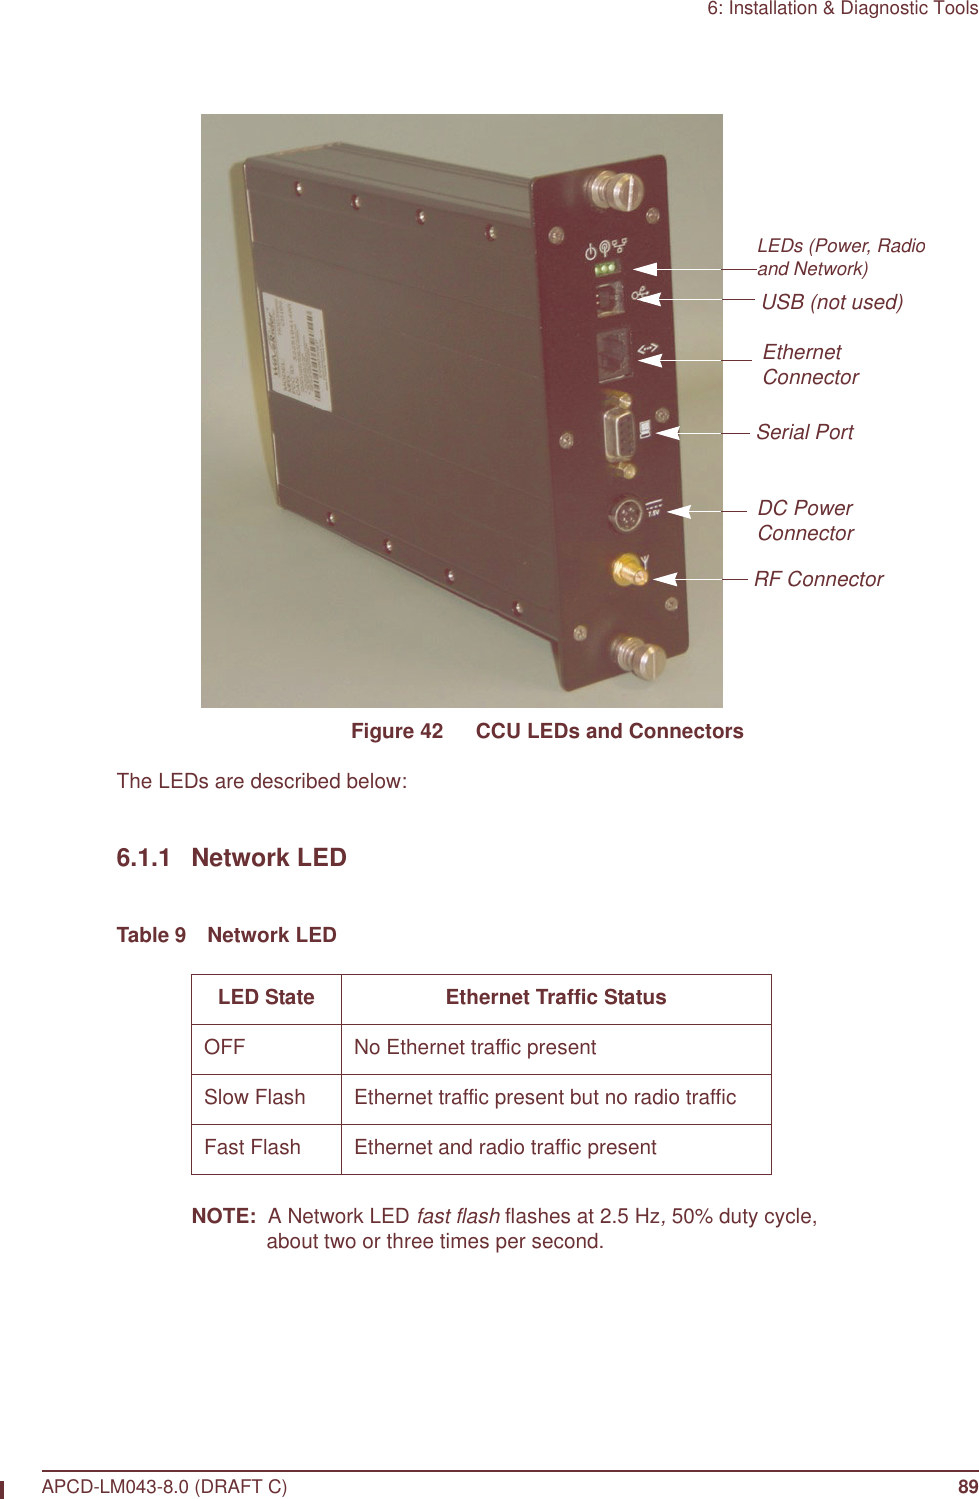 6: Installation &amp; Diagnostic ToolsAPCD-LM043-8.0 (DRAFT C) 89Figure 42   CCU LEDs and ConnectorsThe LEDs are described below:6.1.1 Network LEDTable 9 Network LEDNOTE:  A Network LED fast flash flashes at 2.5 Hz, 50% duty cycle, about two or three times per second.LED State Ethernet Traffic StatusOFF No Ethernet traffic presentSlow Flash Ethernet traffic present but no radio trafficFast Flash Ethernet and radio traffic presentLEDs (Power, Radio,and Network)RF ConnectorUSB (not used)DC Power ConnectorSerial PortEthernet Connector